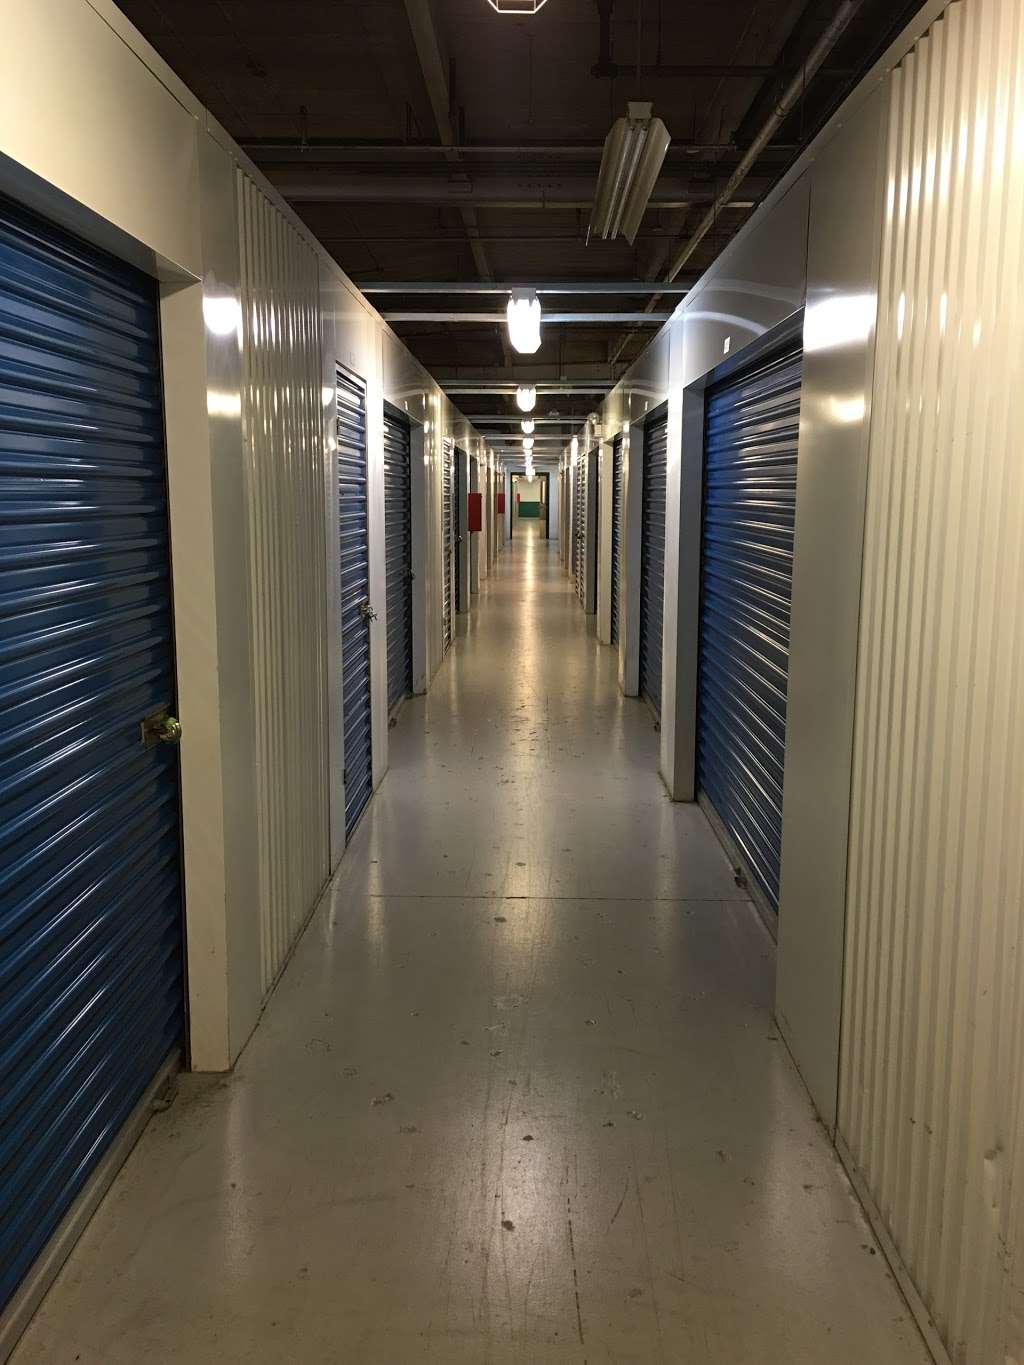 Extra Space Storage | 4821 W 67th St, Bedford Park, IL 60638, USA | Phone: (708) 458-5700